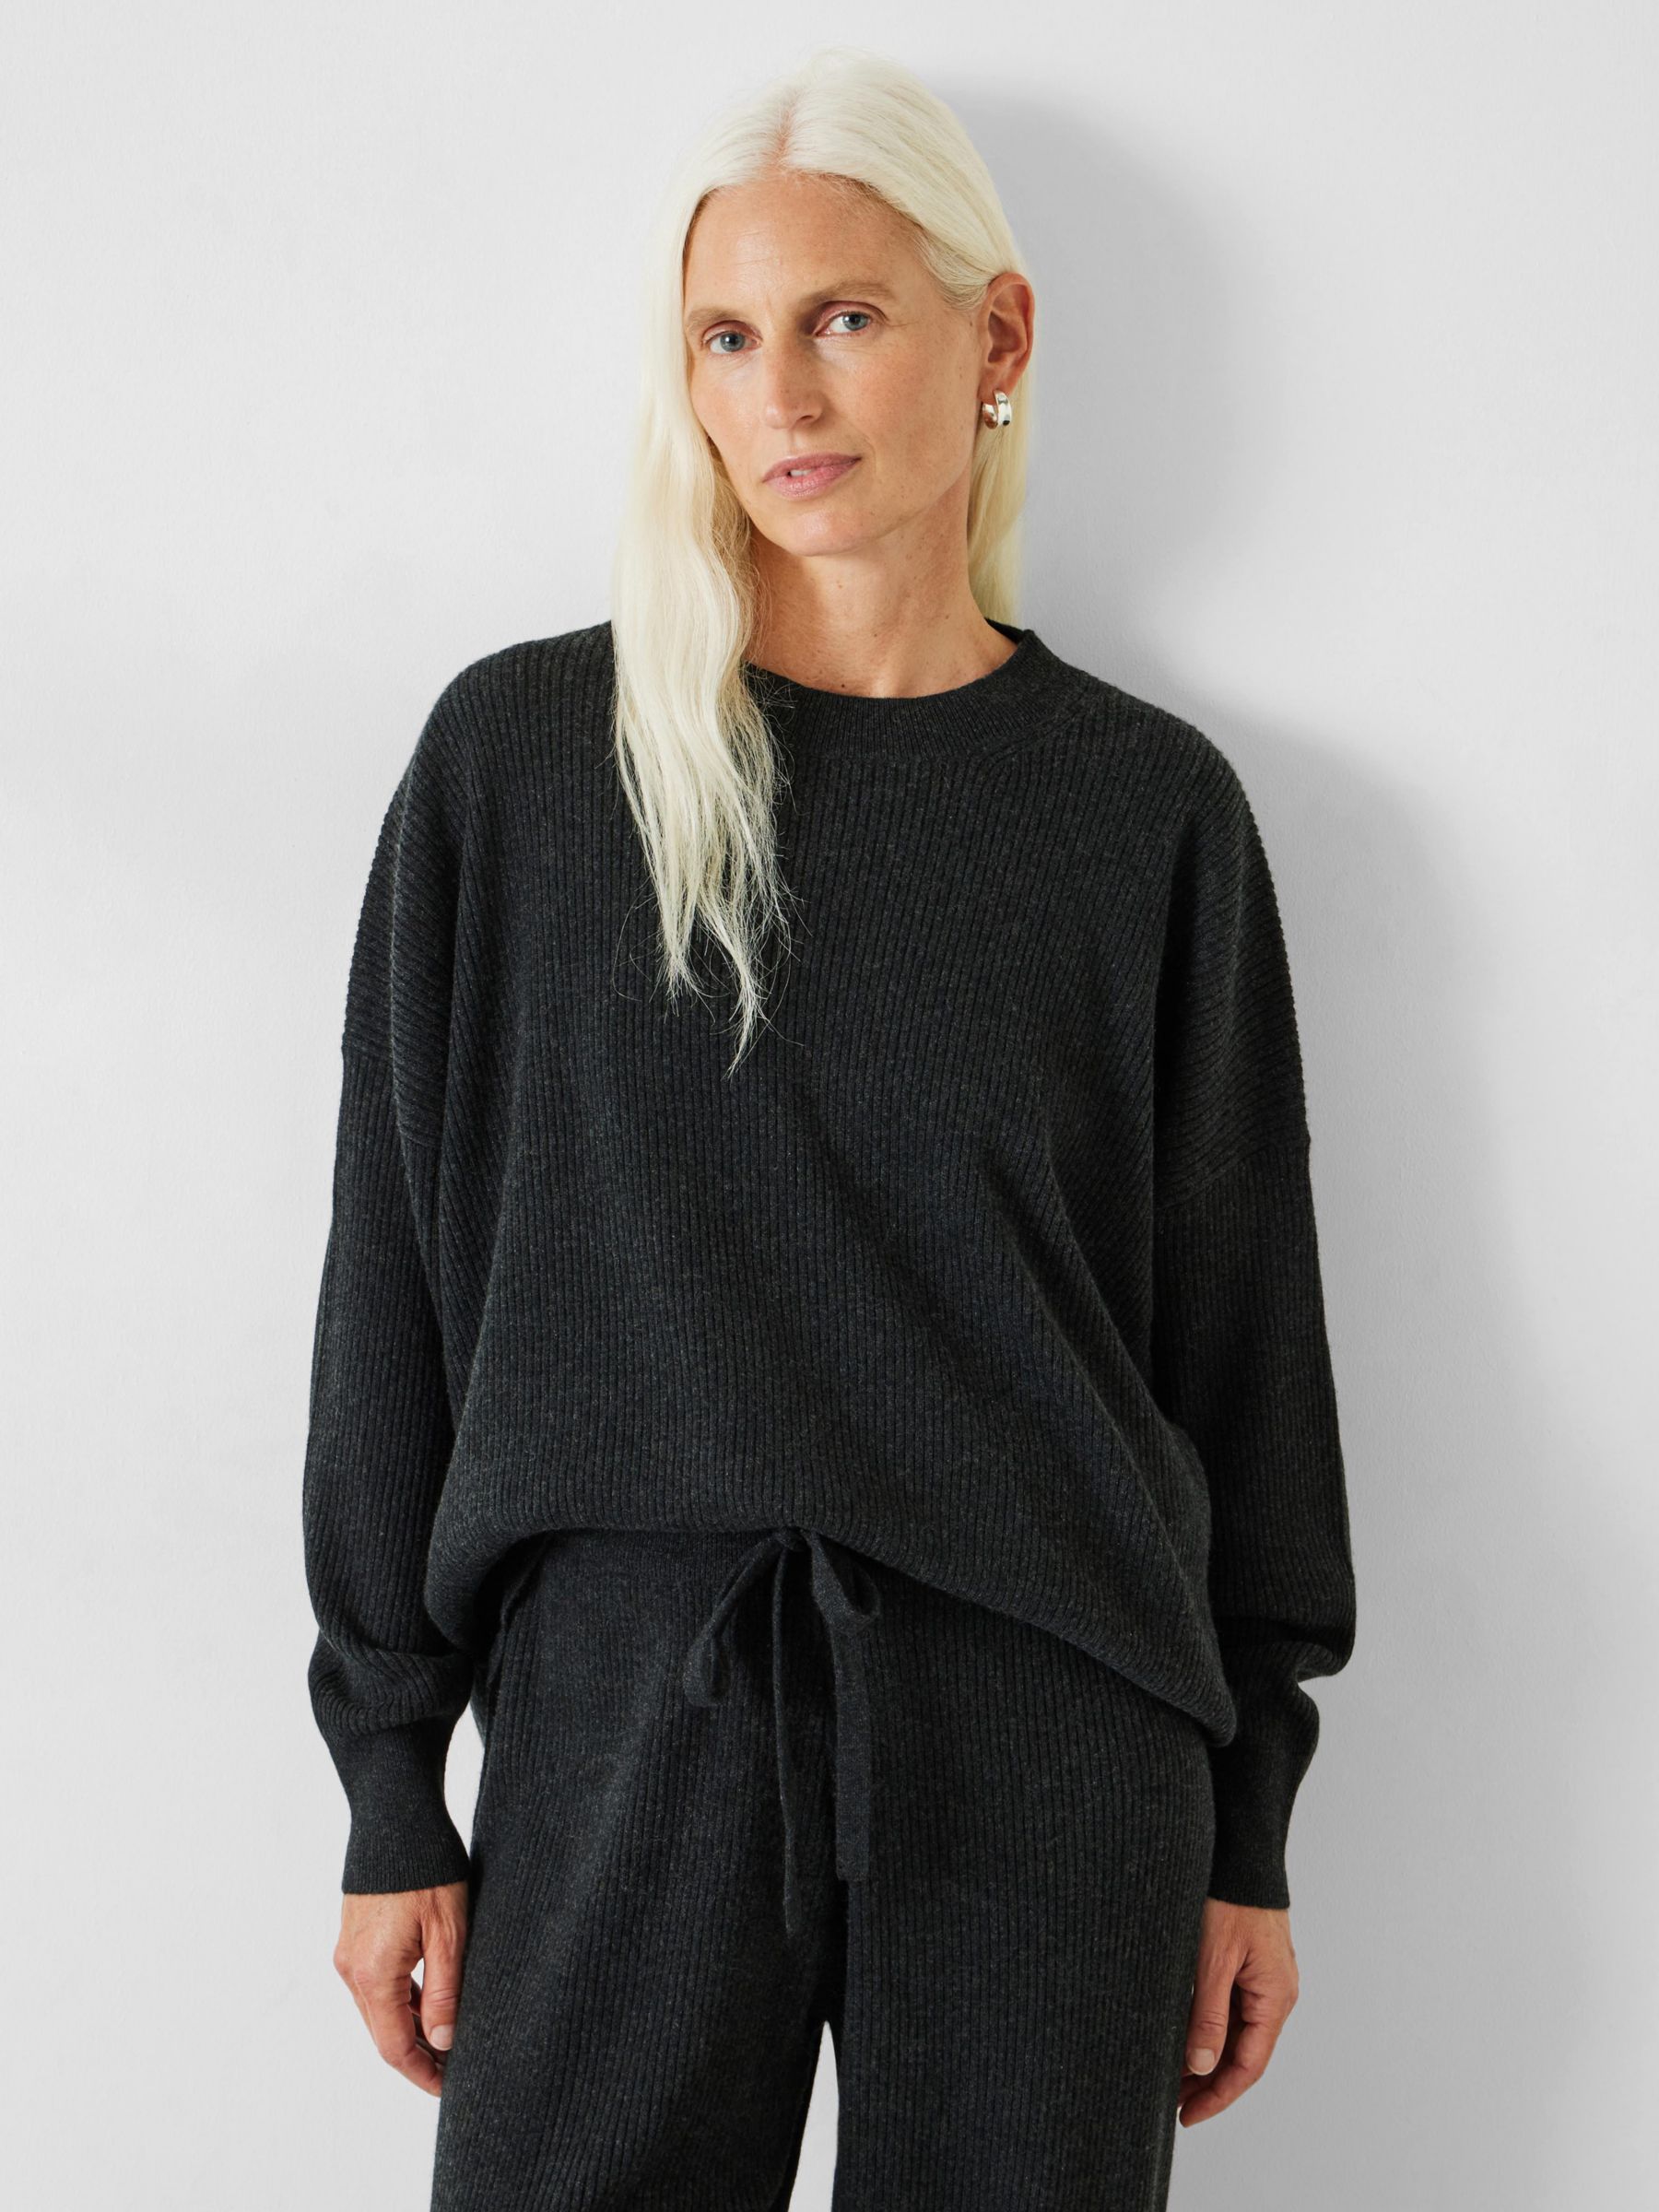 HUSH Mae Relaxed Cashmere Lounge Top, Charcoal Marl, XXS